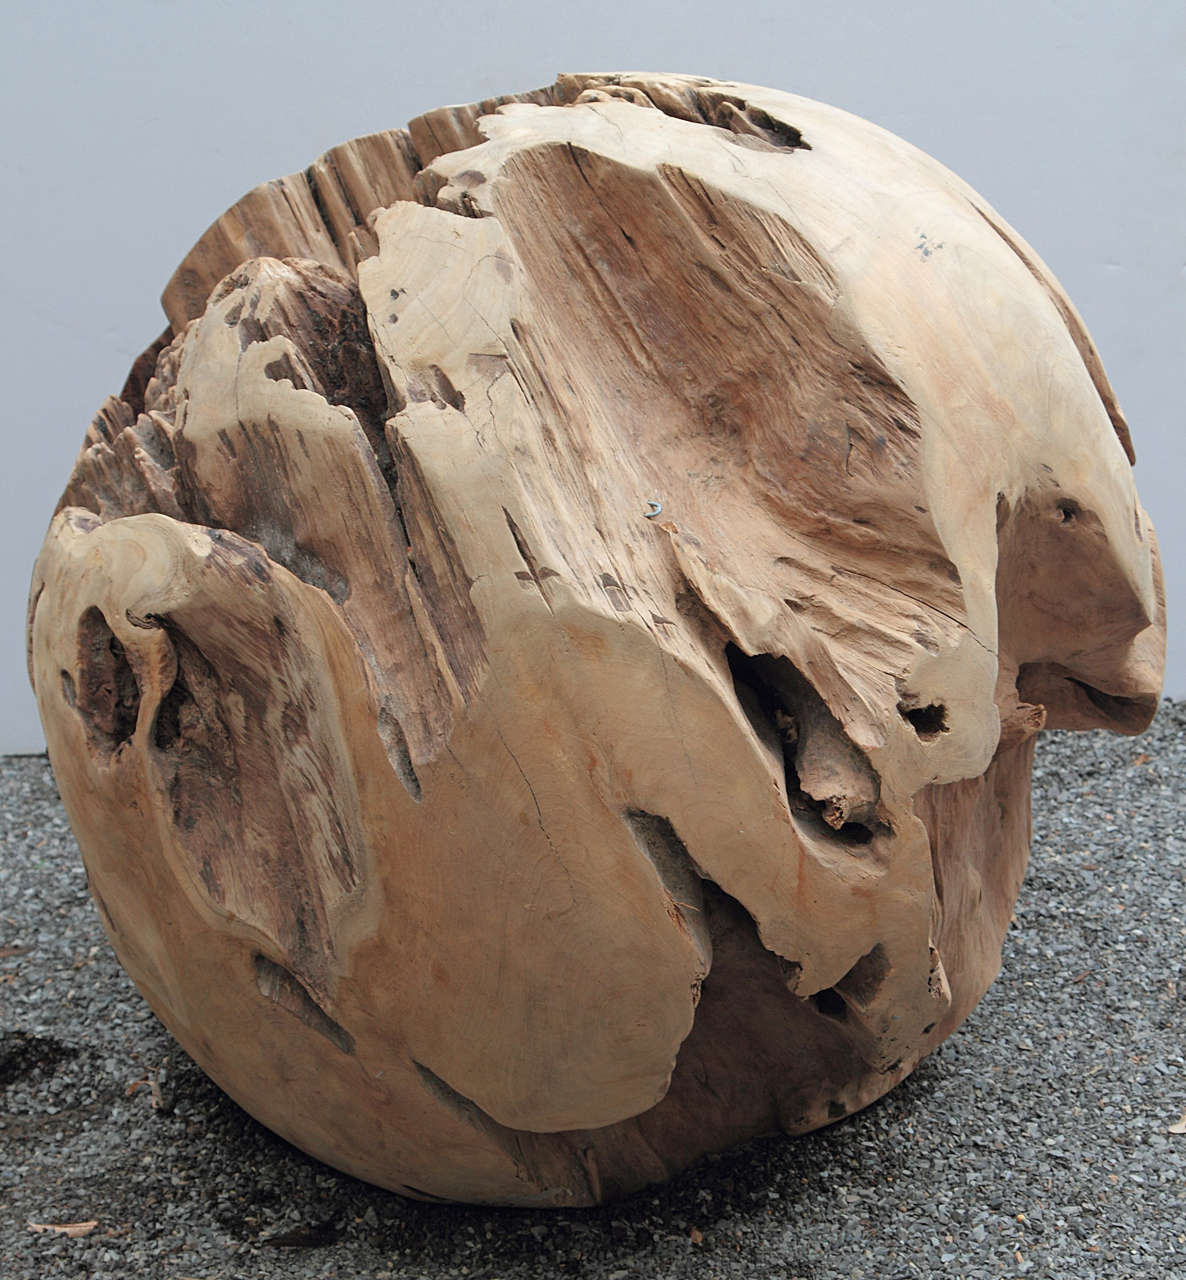 Antique wood balls made of hundred year old teak tree roots
will give you a strong natural look for home decor or garden accessory 
Large teak ball for indoor and outdoor use
The teak balls can be cut flat to make teak ball seats and teak ball